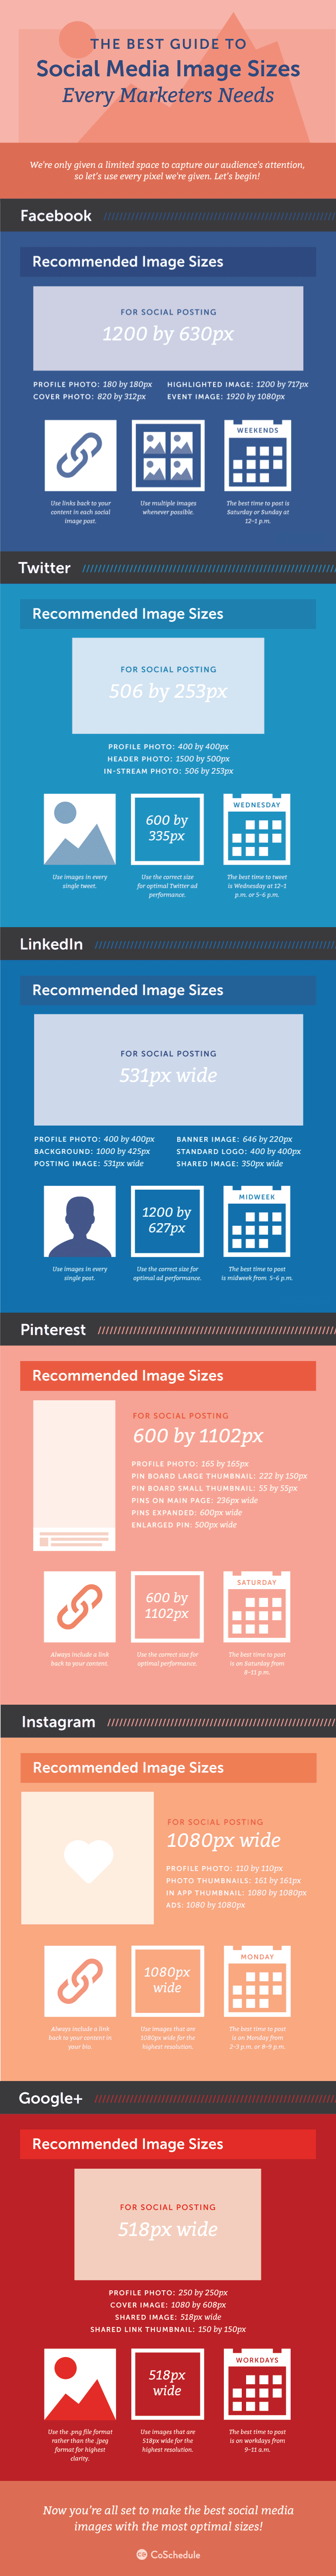 Best image sizing for social media cheat sheet